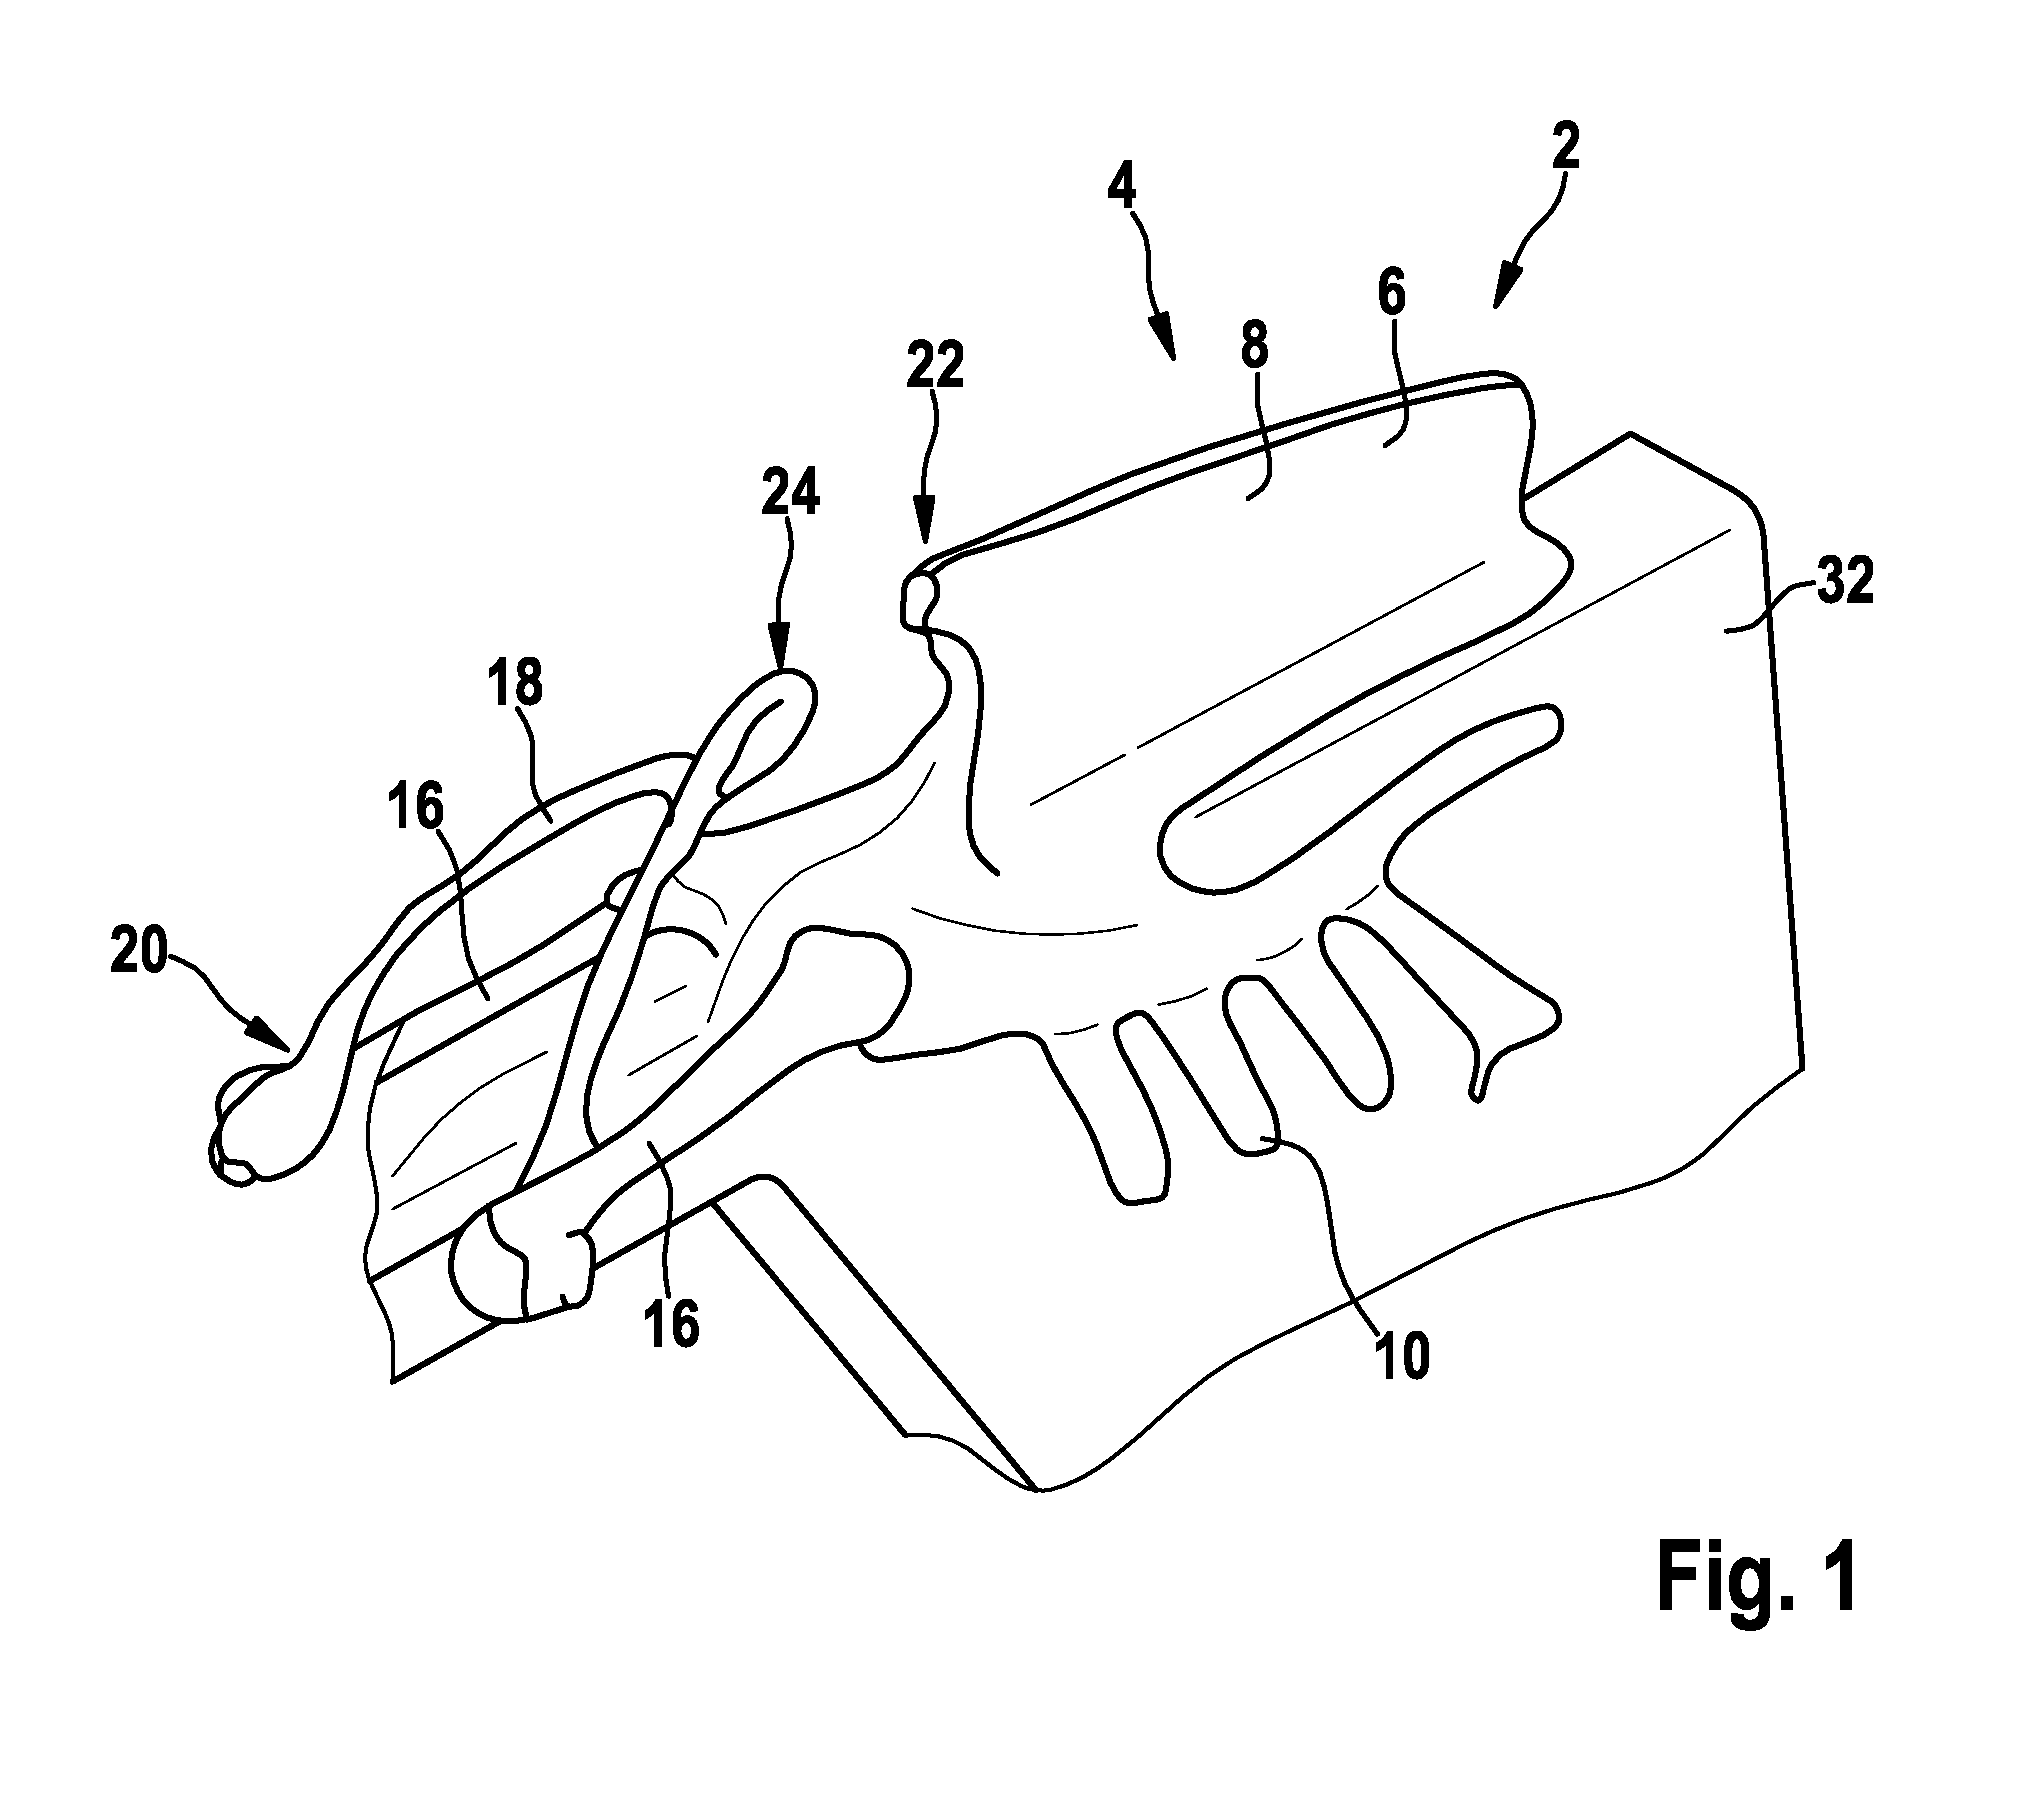 Apparatus and method for separating the wishbone from eviscerated poultry carcasses